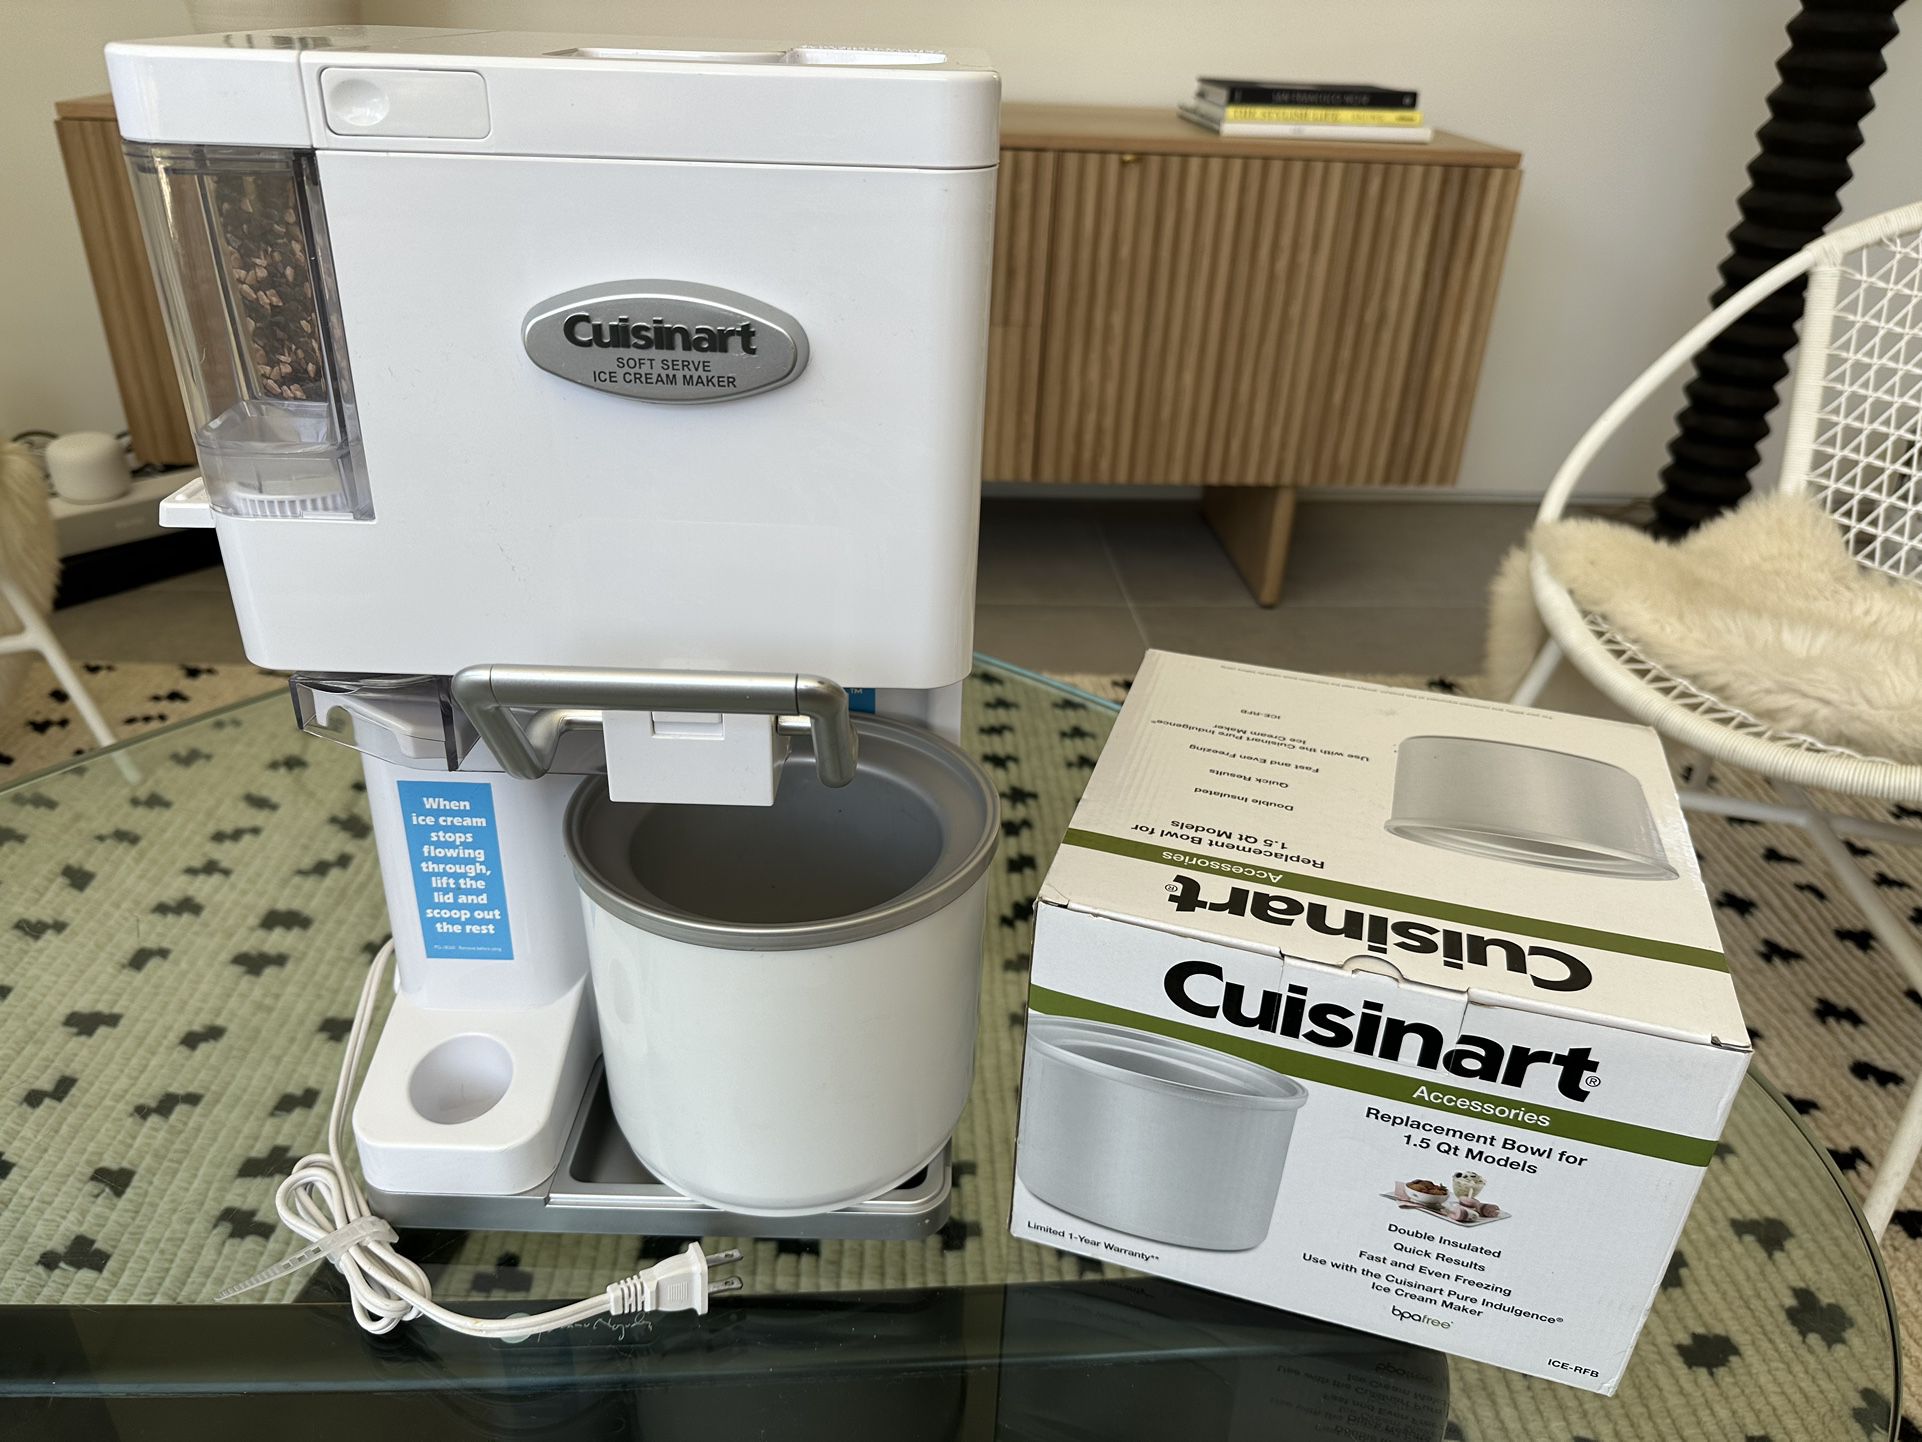 Cuisinart Soft Serve Ice Cream Maker for Sale in Los Angeles, CA - OfferUp